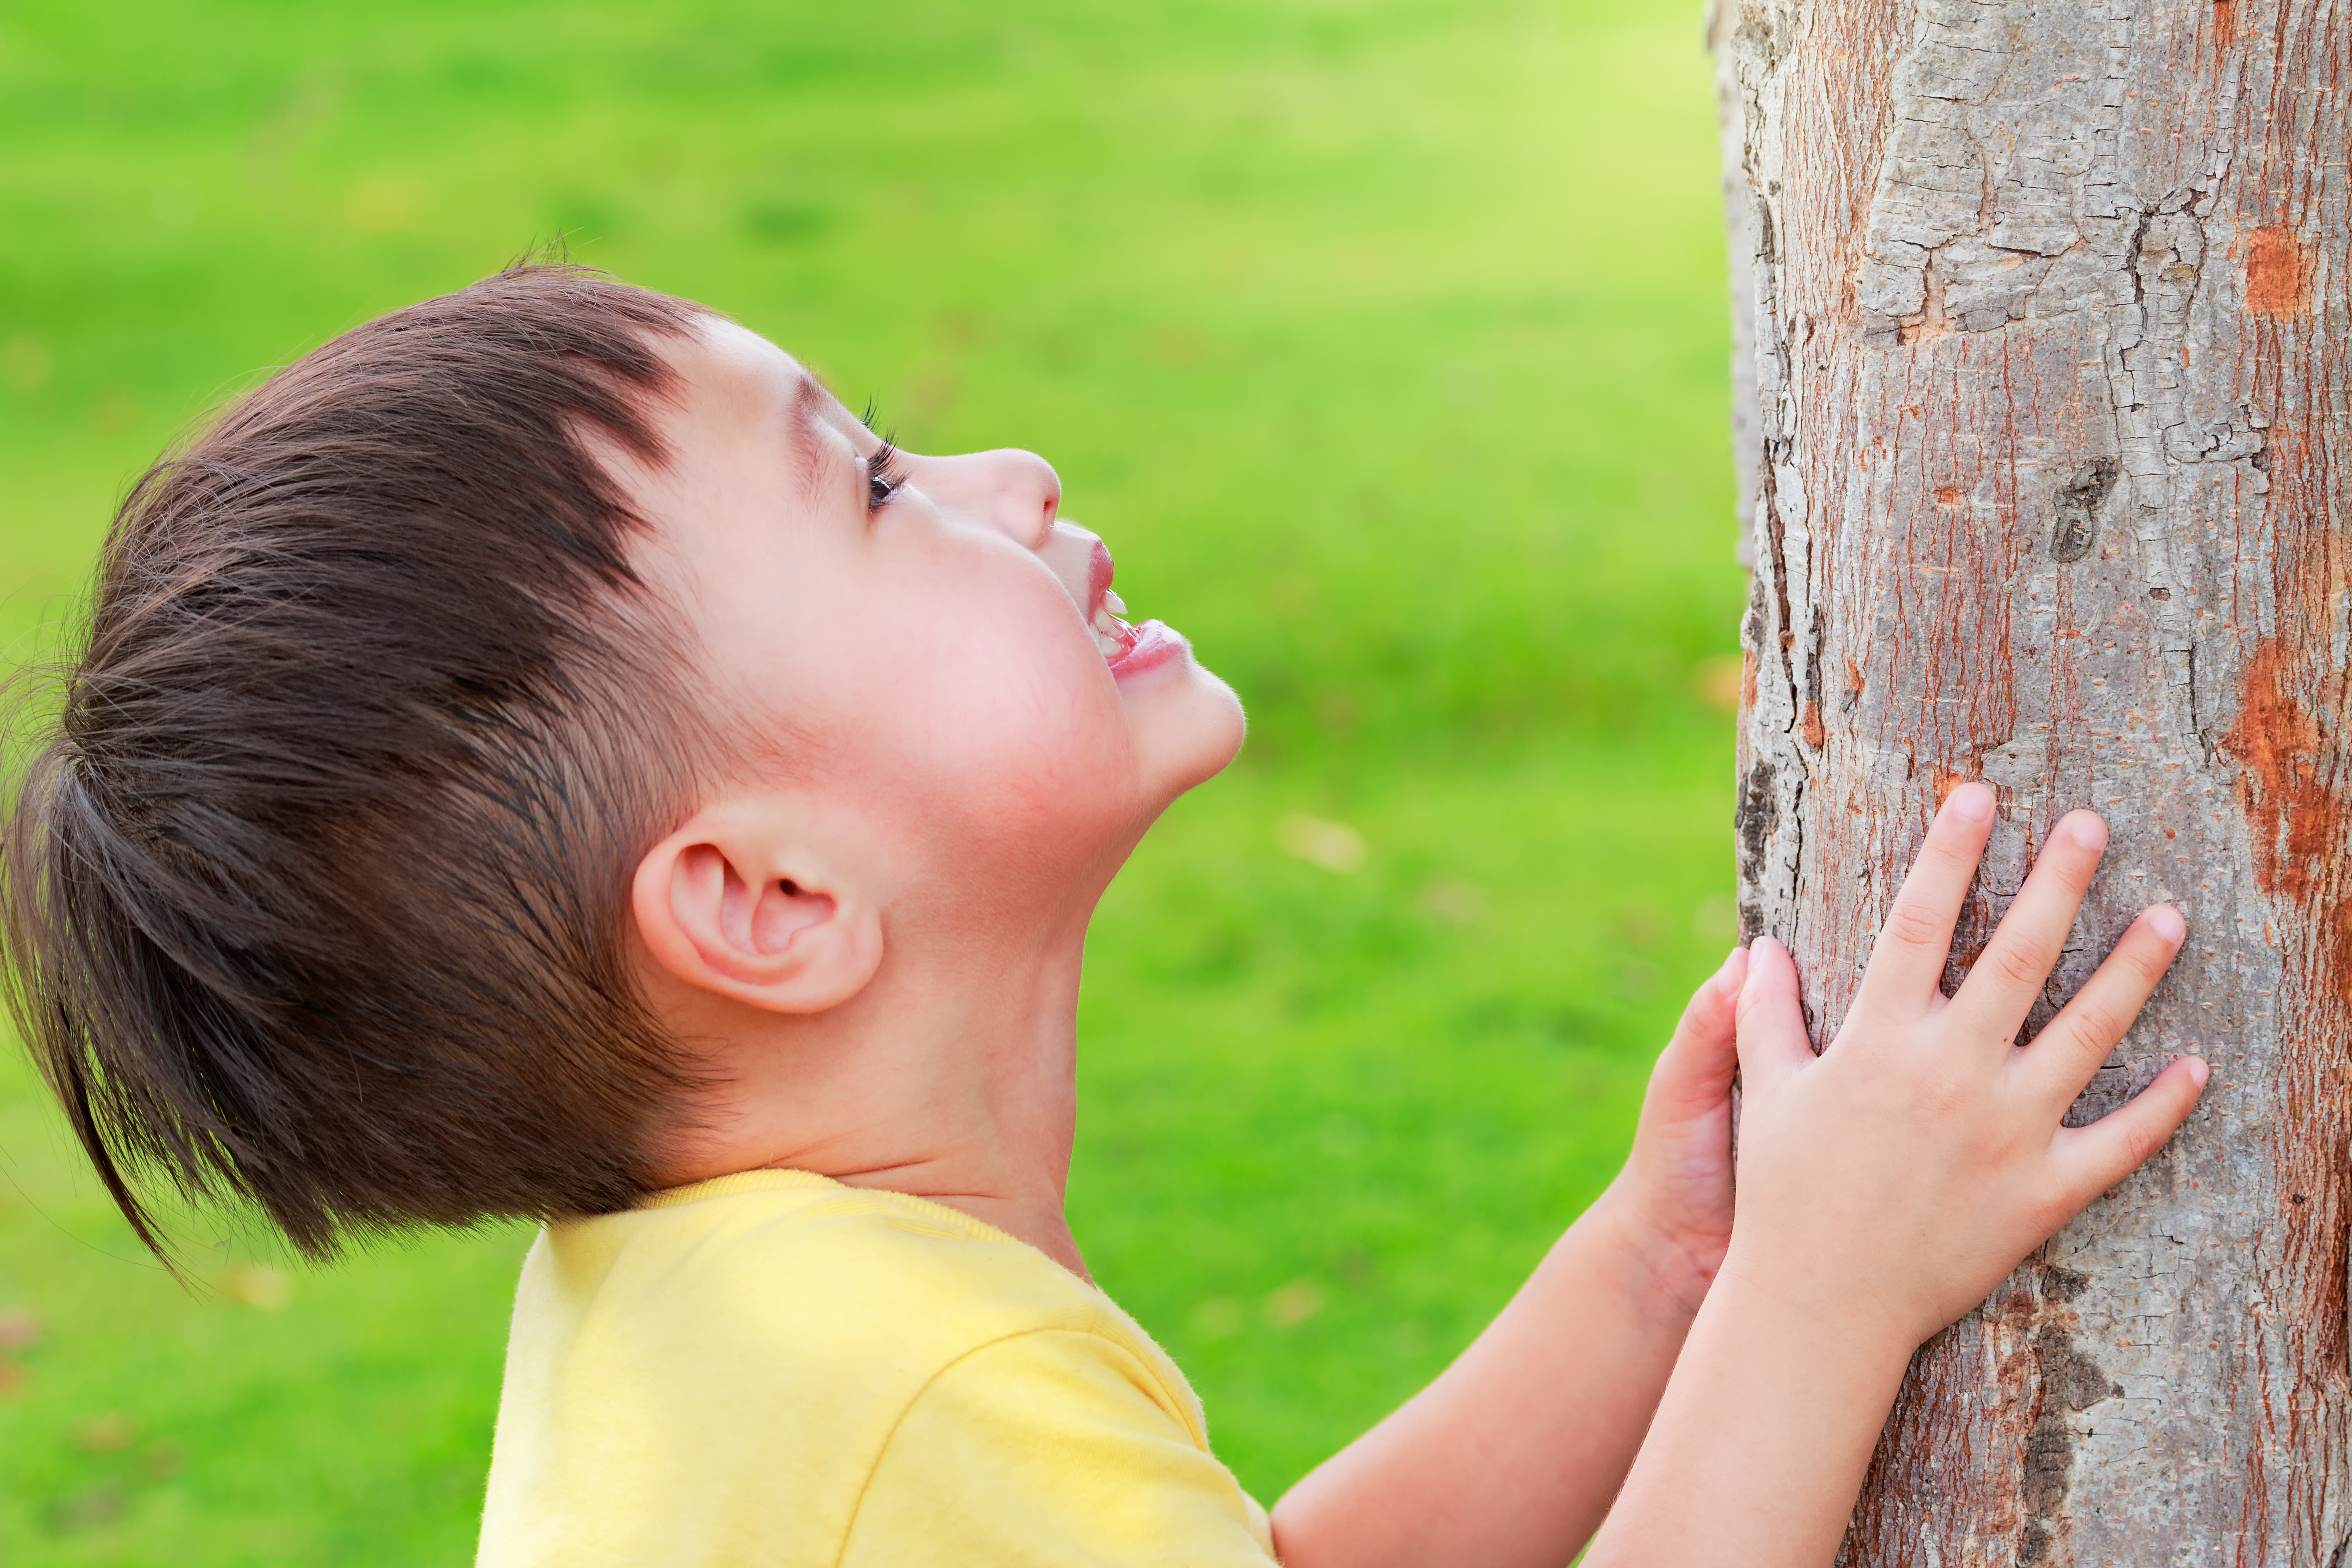 A young child with short brown hair wearing a yellow t-shirt is touching the trunk of a tree and looking upward. He is smiling. Green grass is in the background.